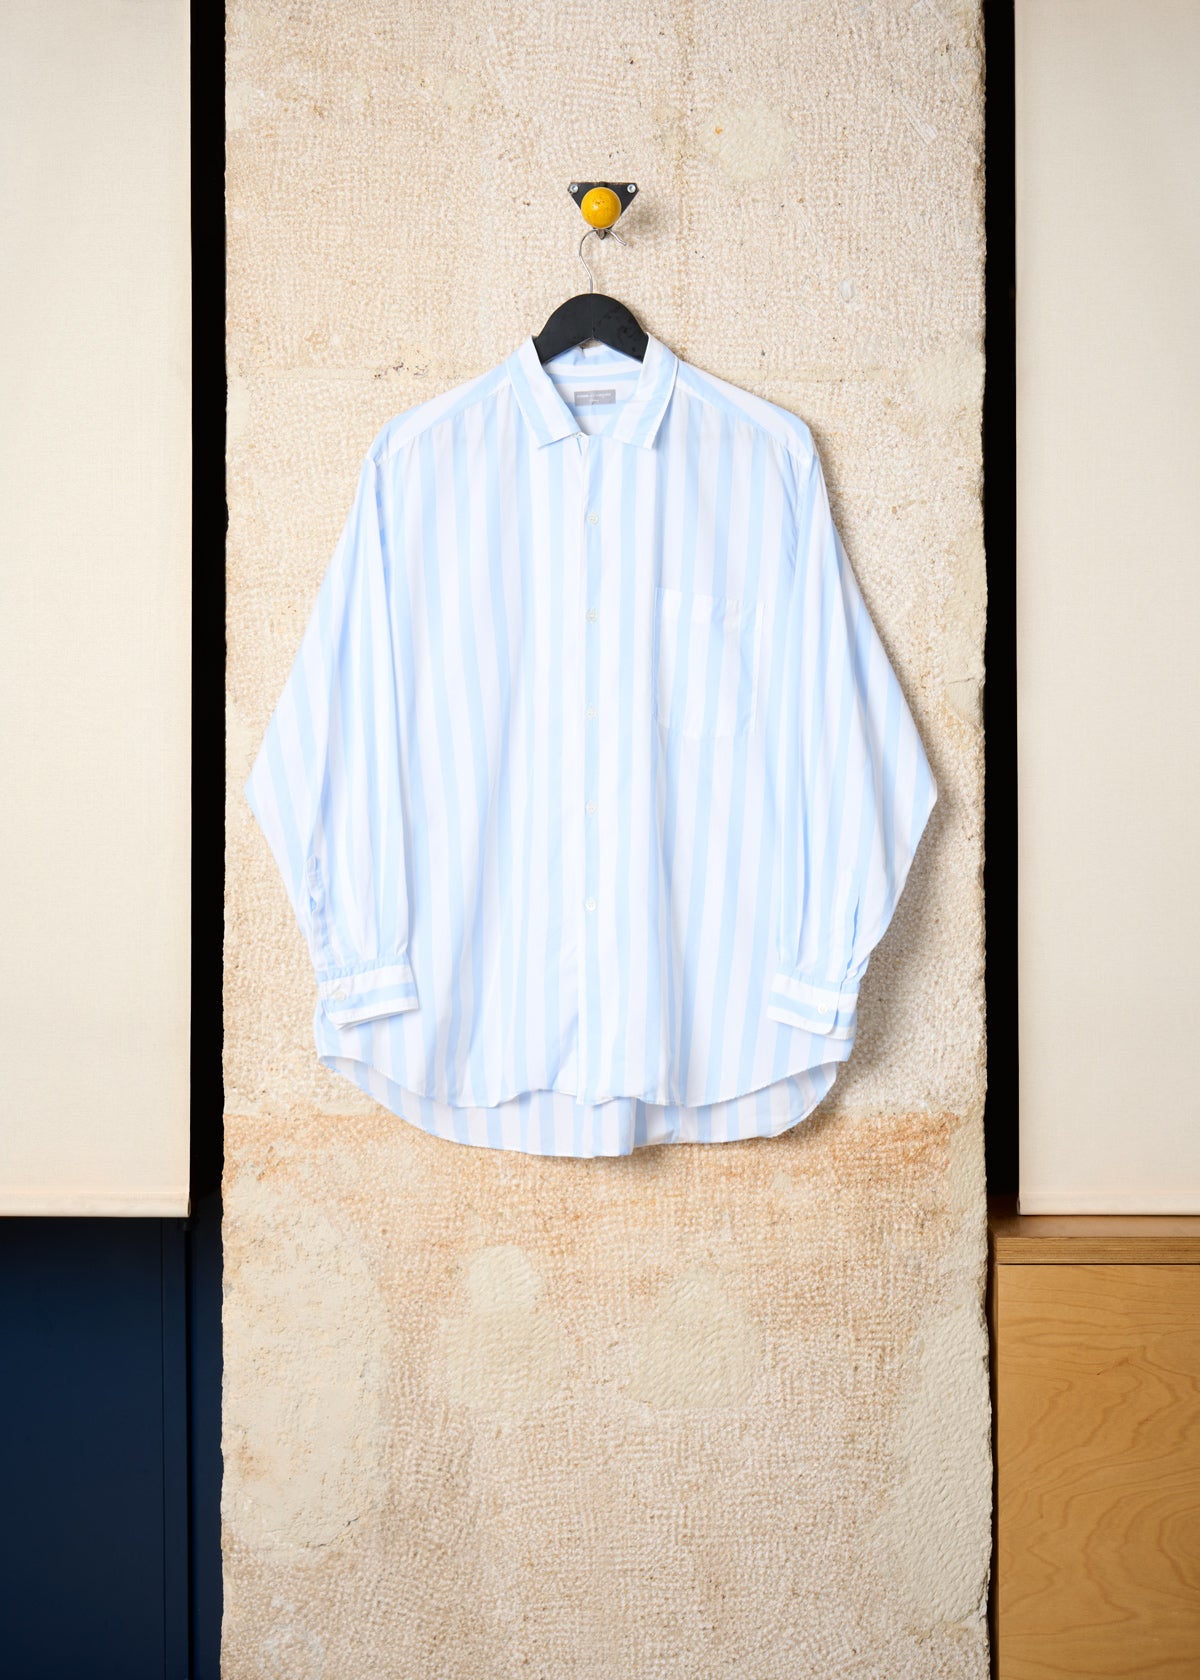 CDG HOMME WHITE BABY BLUE WIDE STRIPES COTTON POPLIN SHIRT 1990's - Large